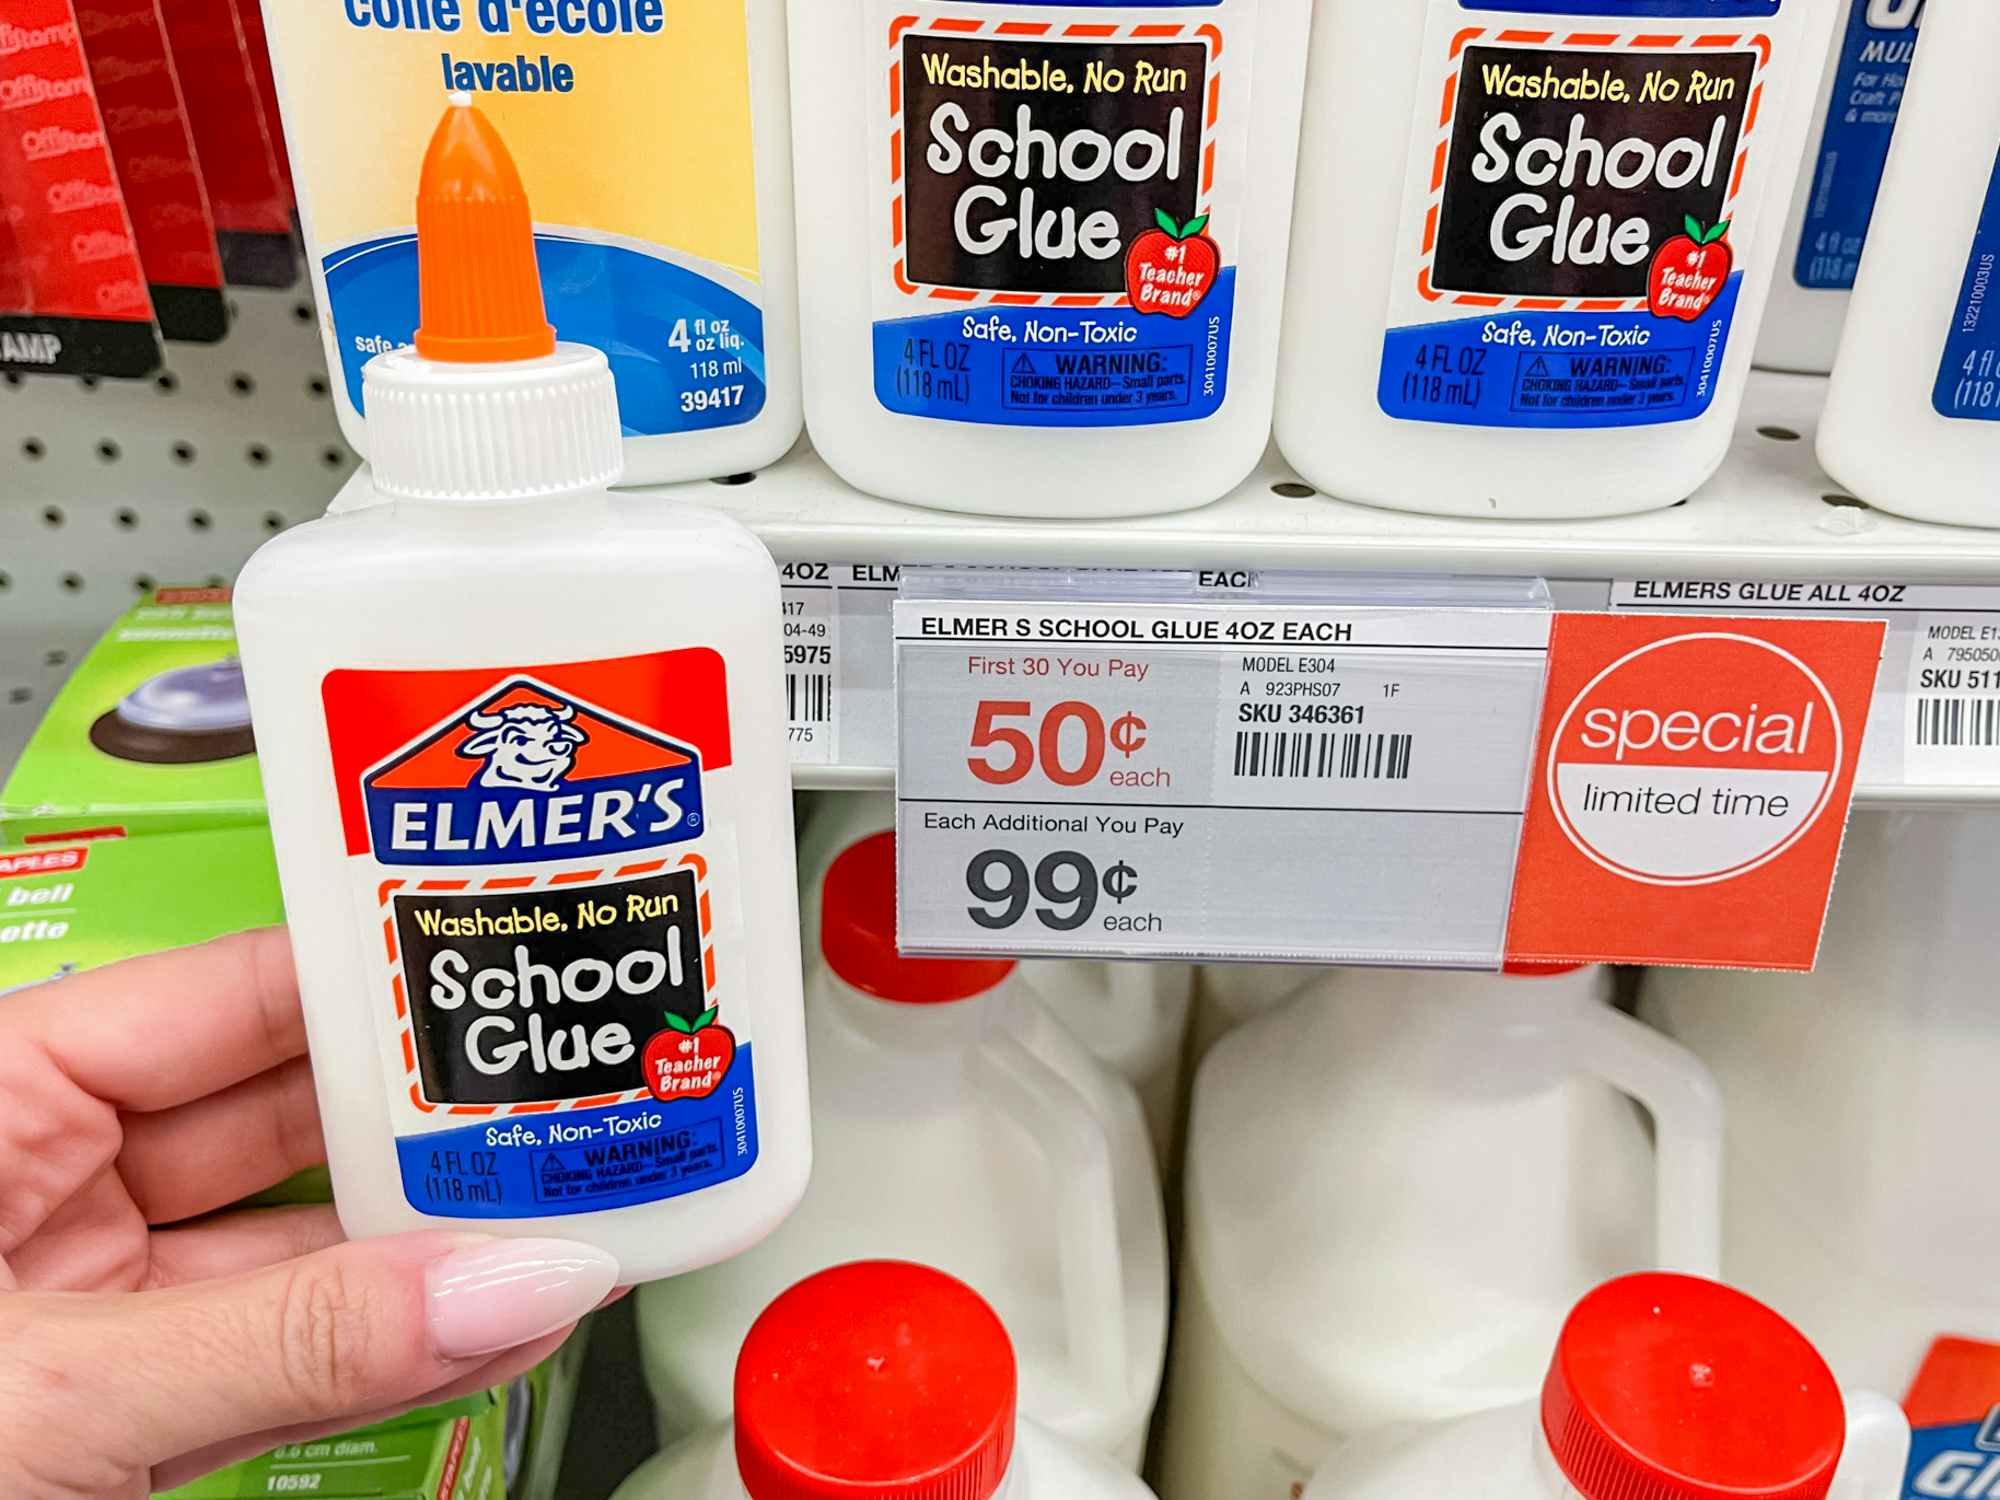 Someone holding a bottle of Elmer's glue next to a price tag for 50¢ at Staples